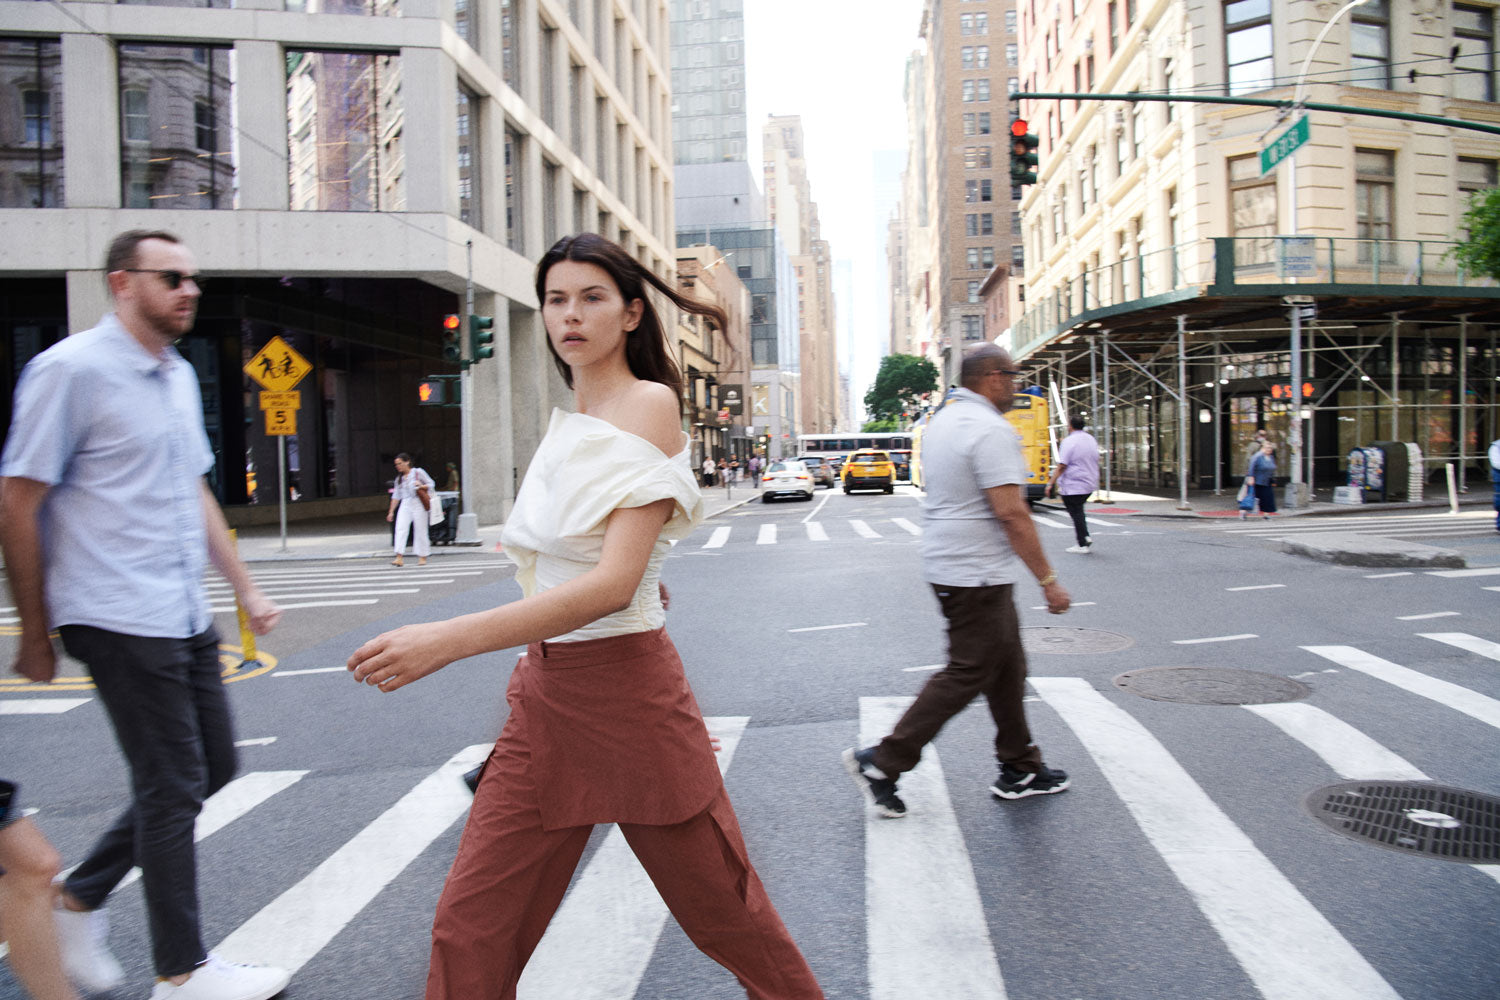 A female figure crossing a busy intersection wearing the Cream 09 Liquid Top